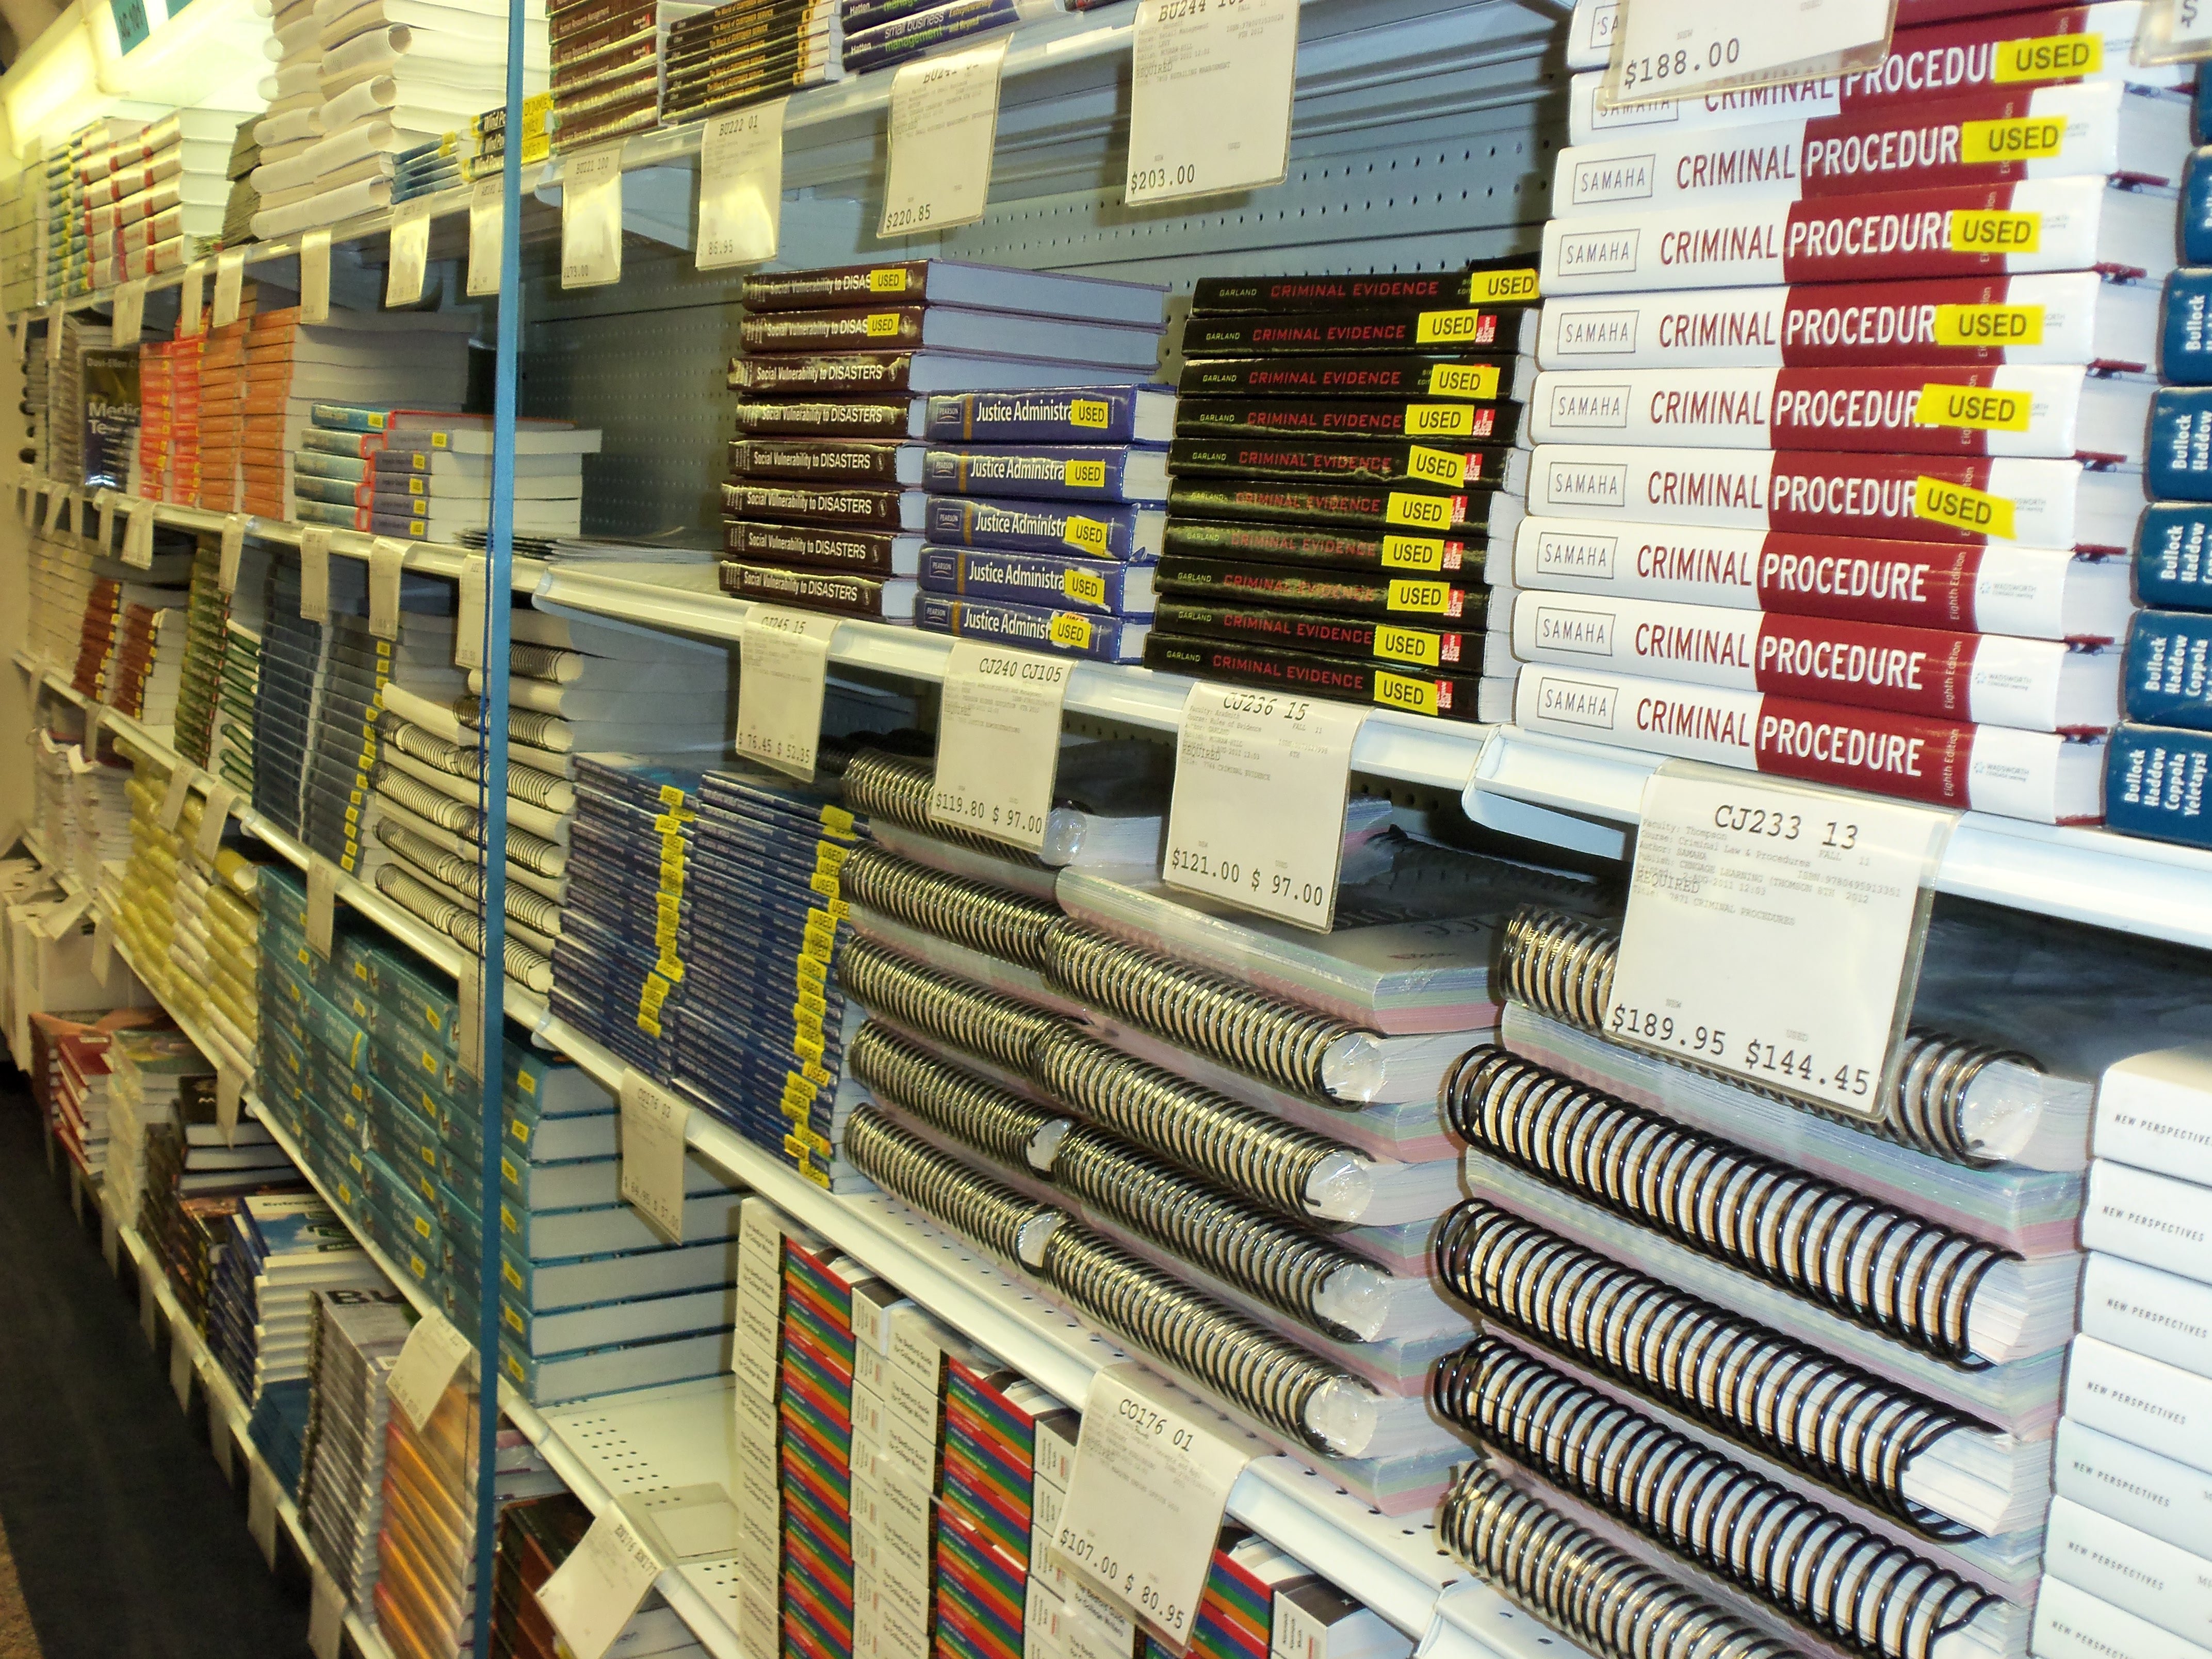 Textbook prices still crippling students, report says